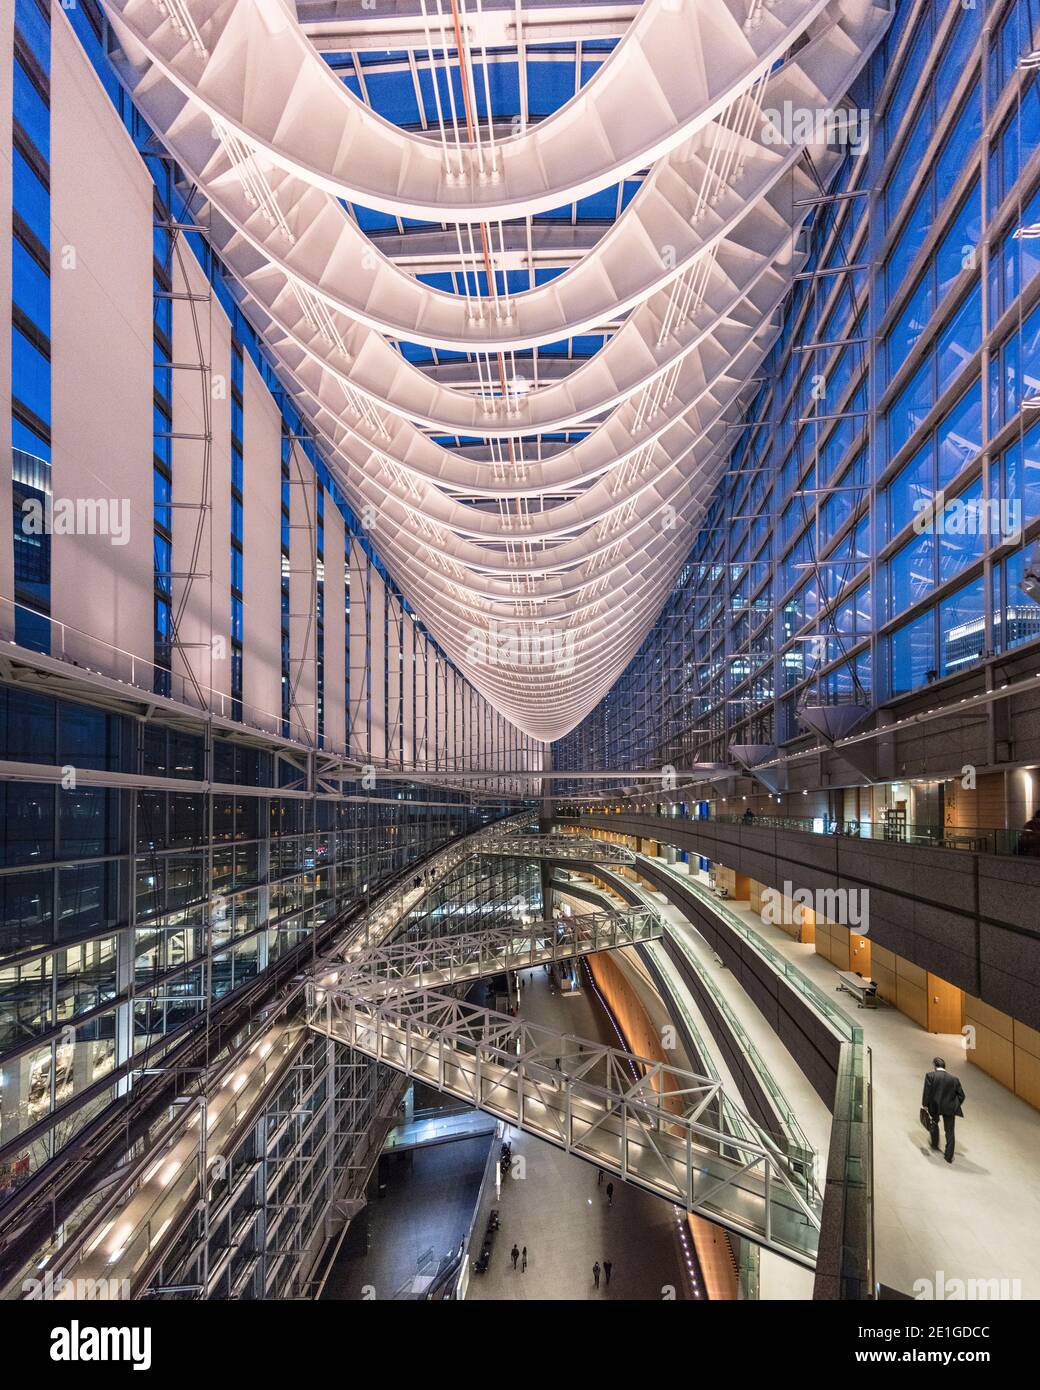 Interior of the Tokyo International Forum, which is a multi-purpose exhibition center in Tokyo, Japan. Stock Photo